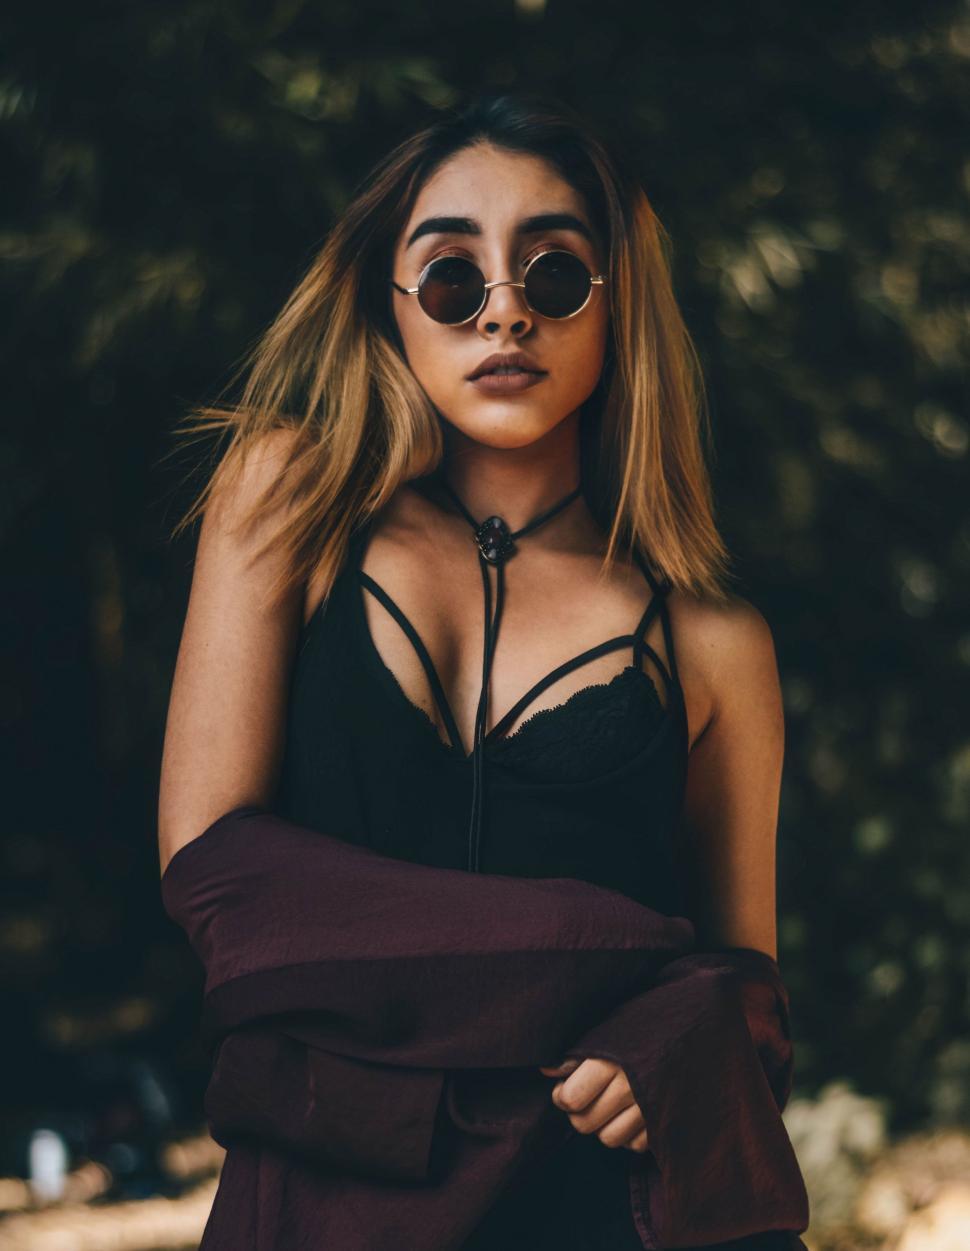 Free Image of Woman Wearing Sunglasses and Black Top 